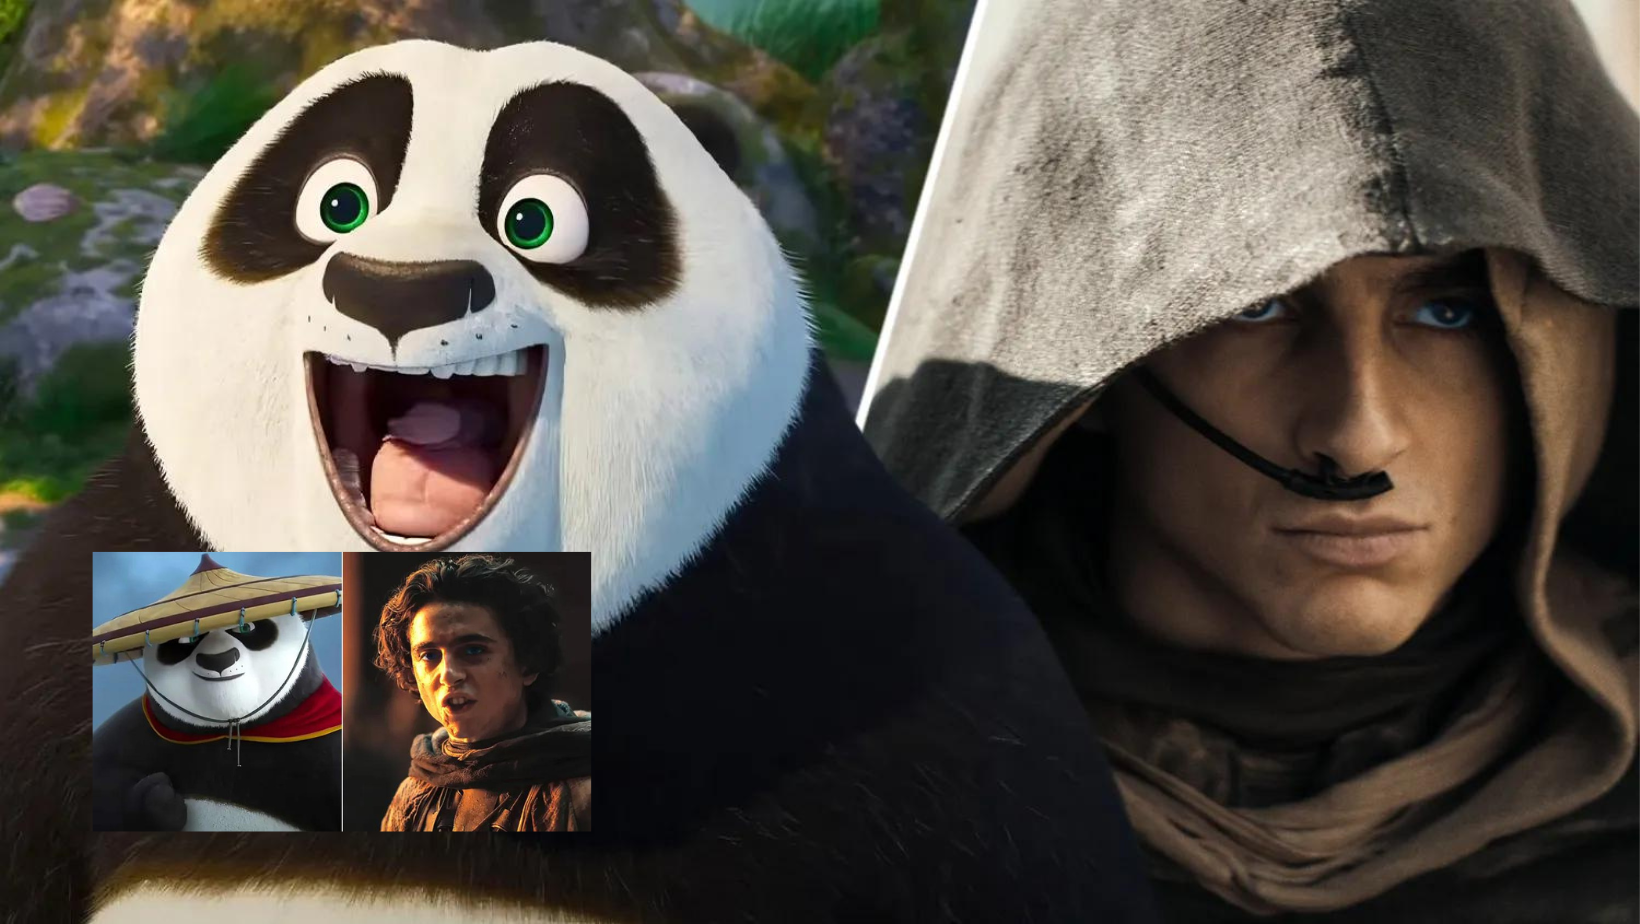 Box Office Arthur the King, starring Mark Wahlberg, brings in $3 million on its first day, with Kung Fu Panda and Dune reigning supreme.